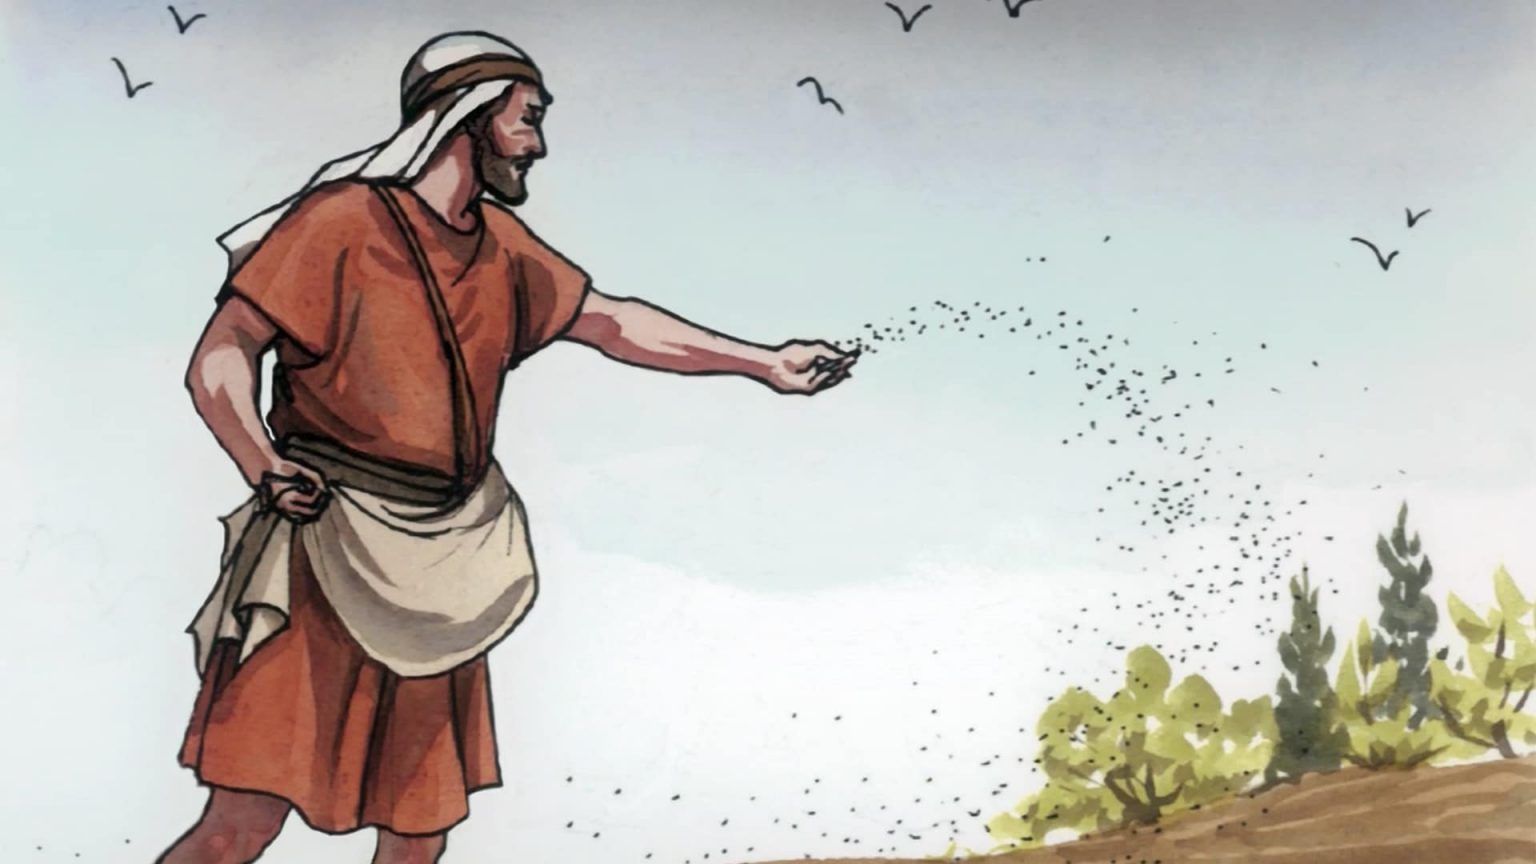 The Parable of the Sower of Matthew from the Bible